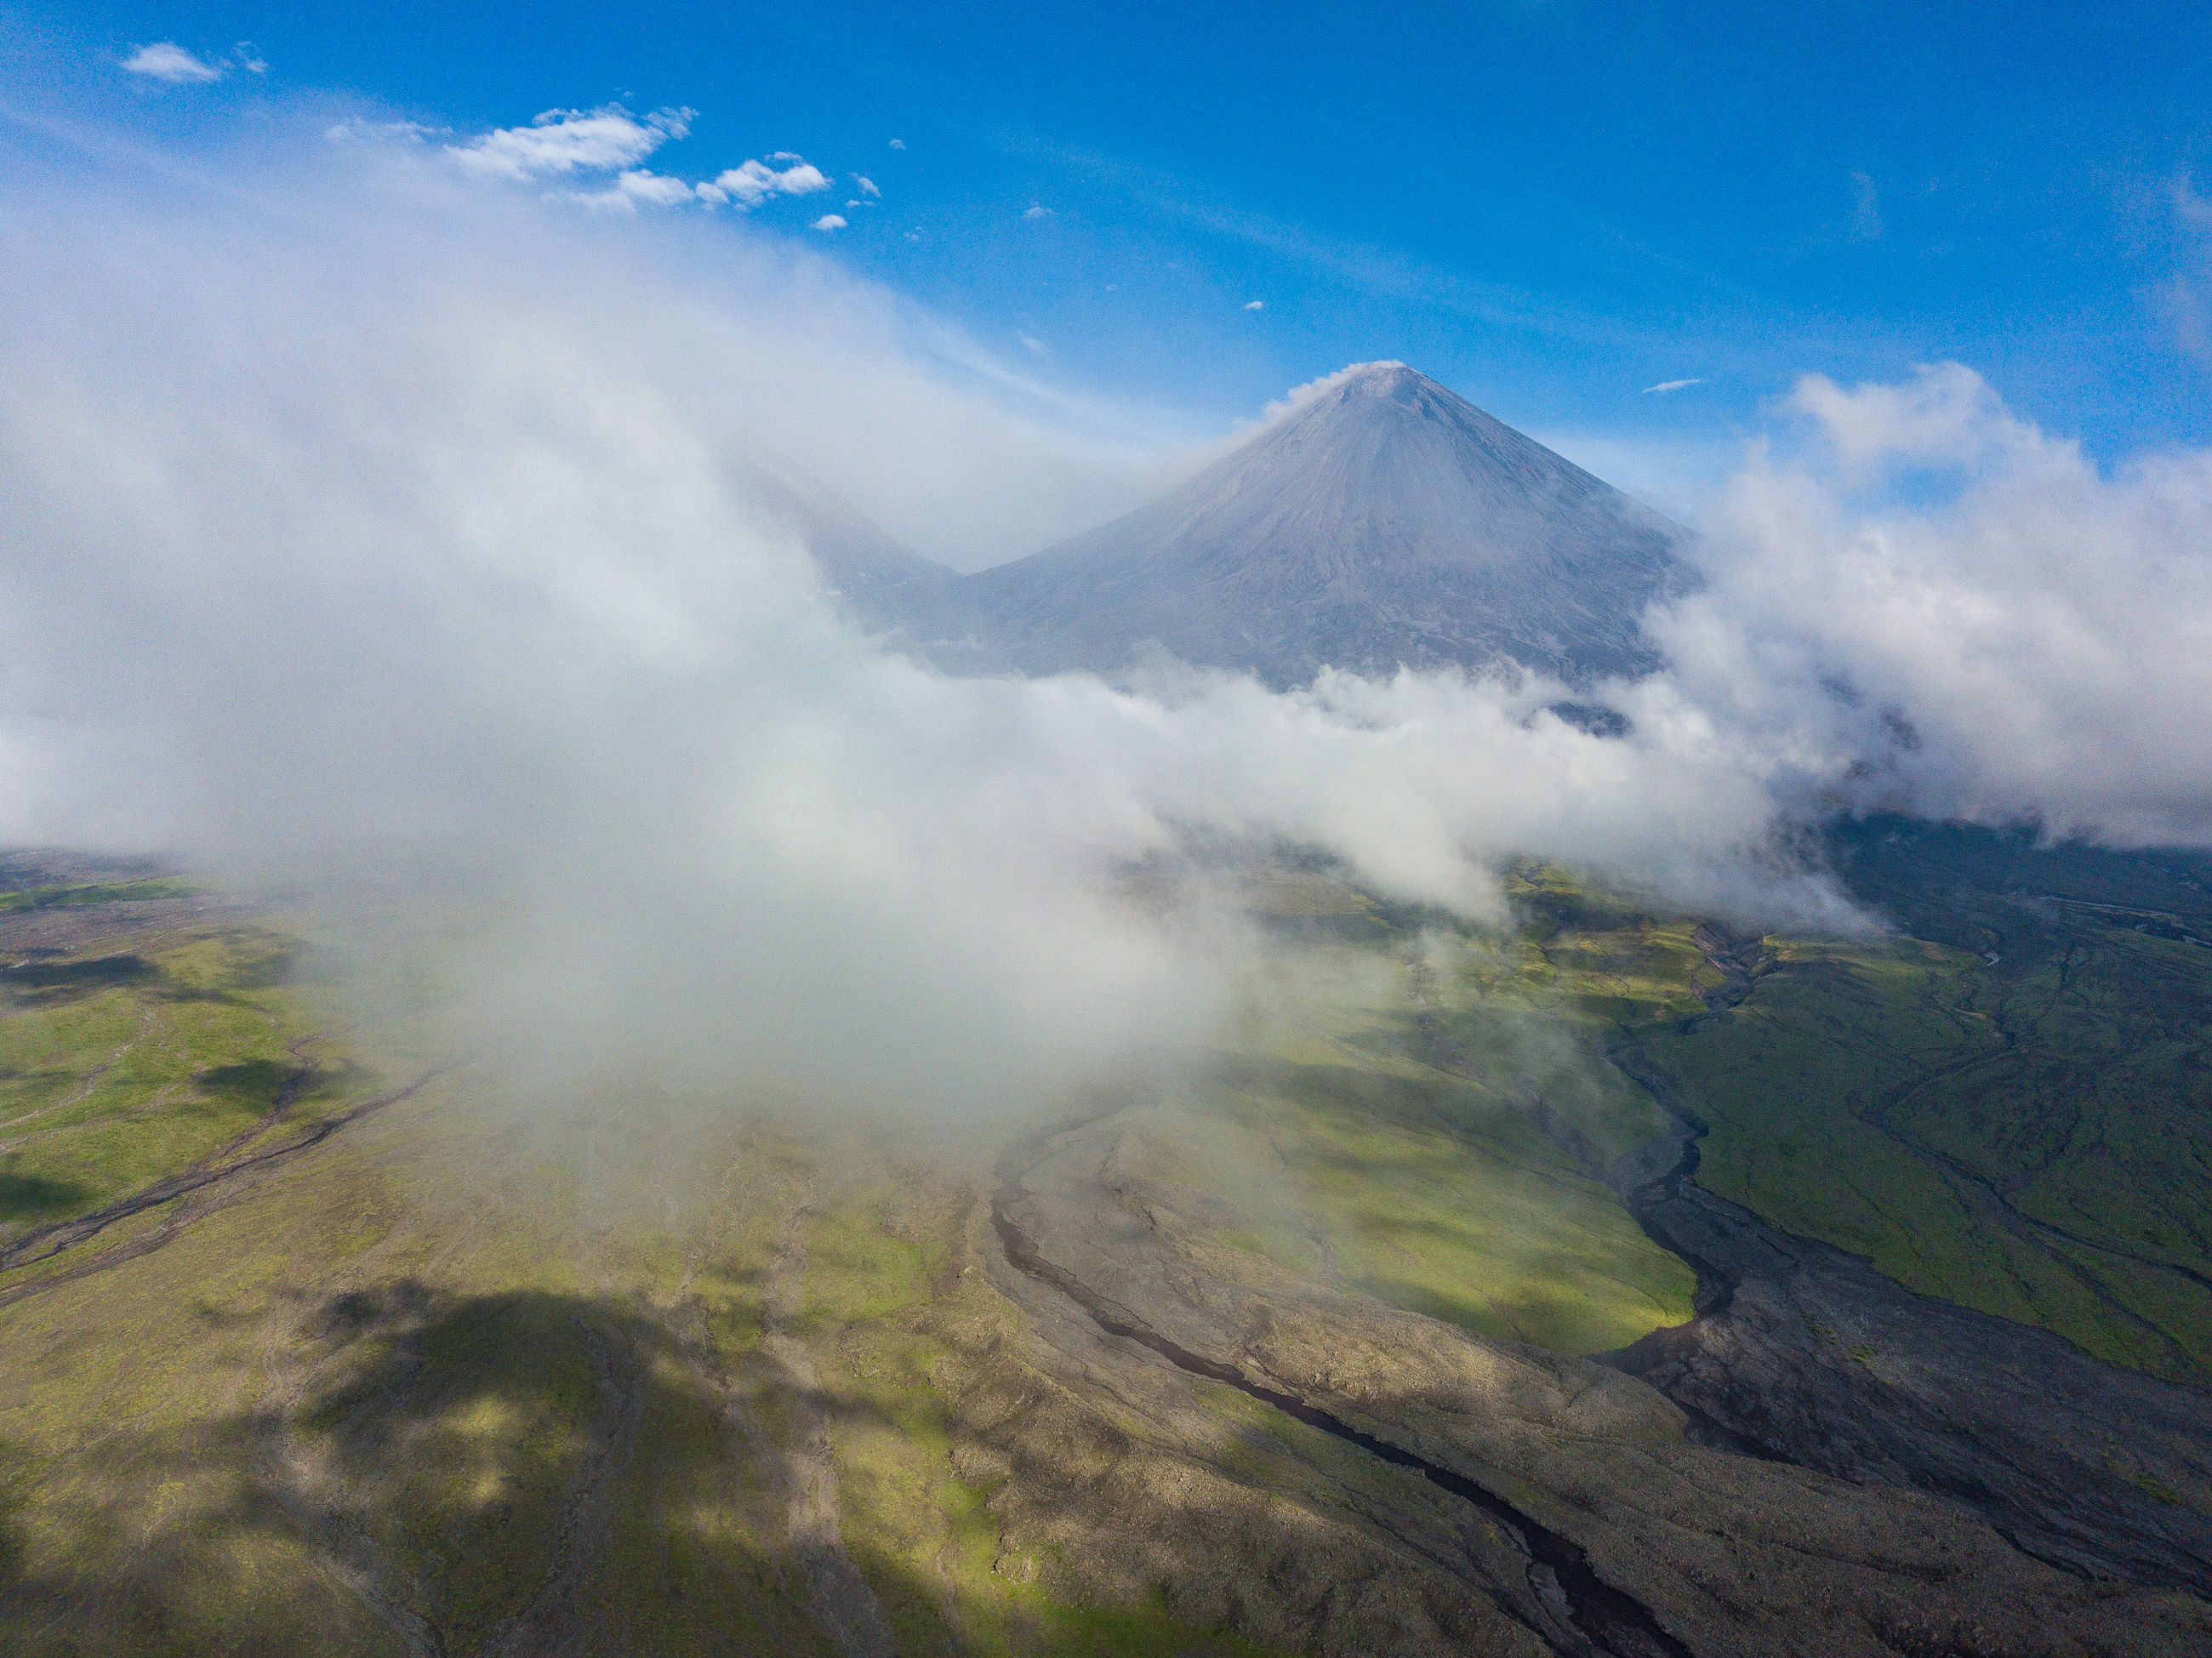 landscape, mountain, volcanic landscape, volcano, physical geography, scenics, geology, beauty in nature, nature, tranquil scene, sky, tranquility, volcanic crater, majestic, smoke - physical structure, outdoors, cloud - sky, day, no people, travel destinations, power in nature, erupting, mountain range, fog